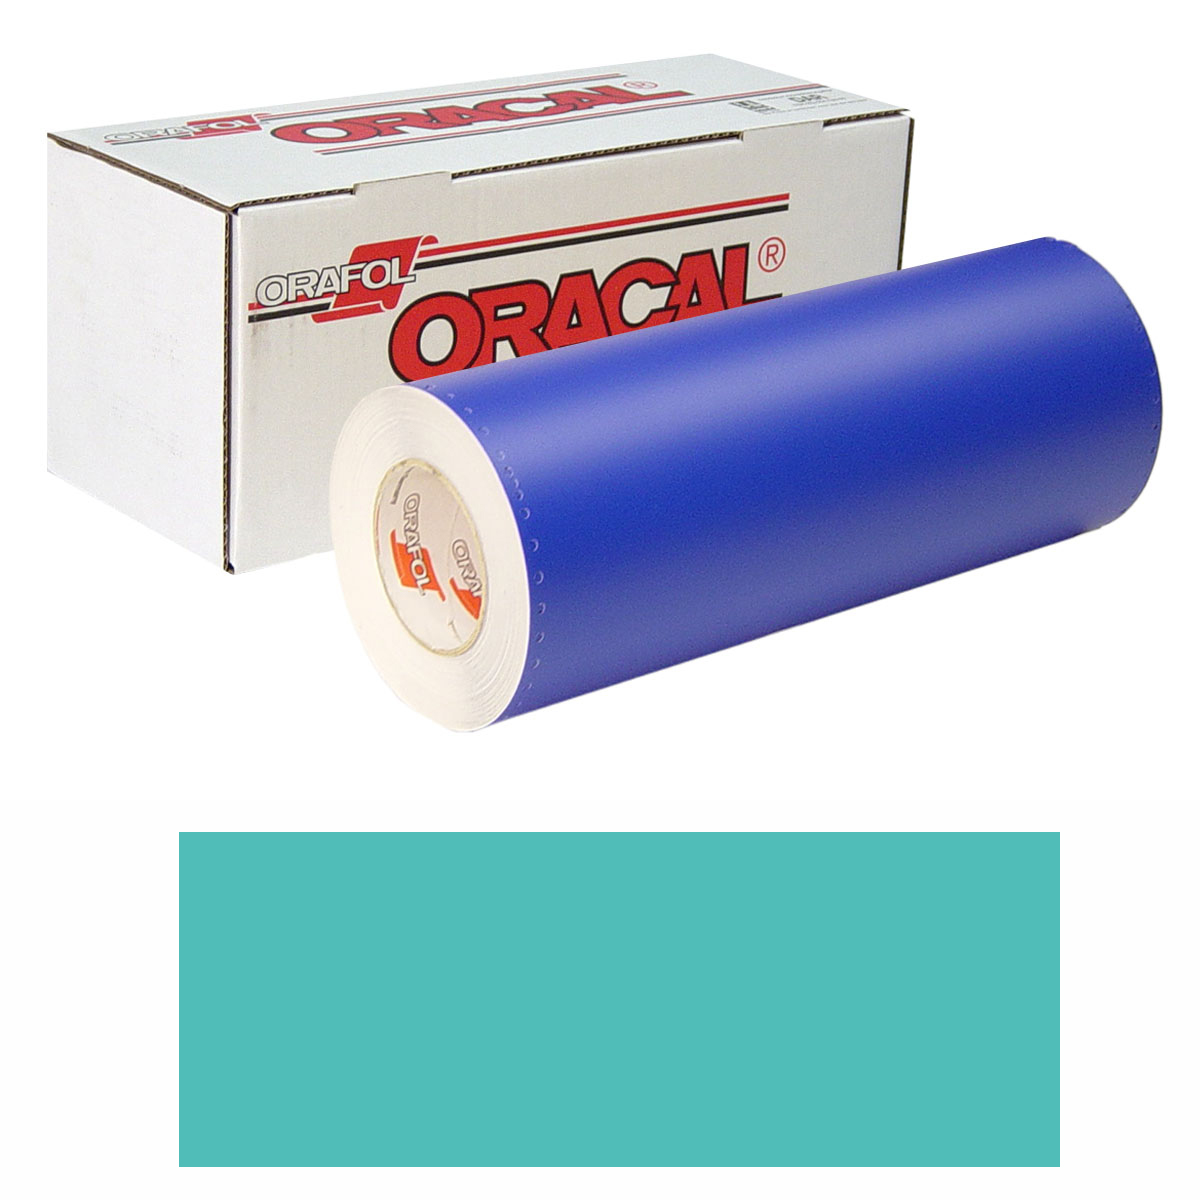 ORACAL 8300 30in X 50yd 054 Turquoise